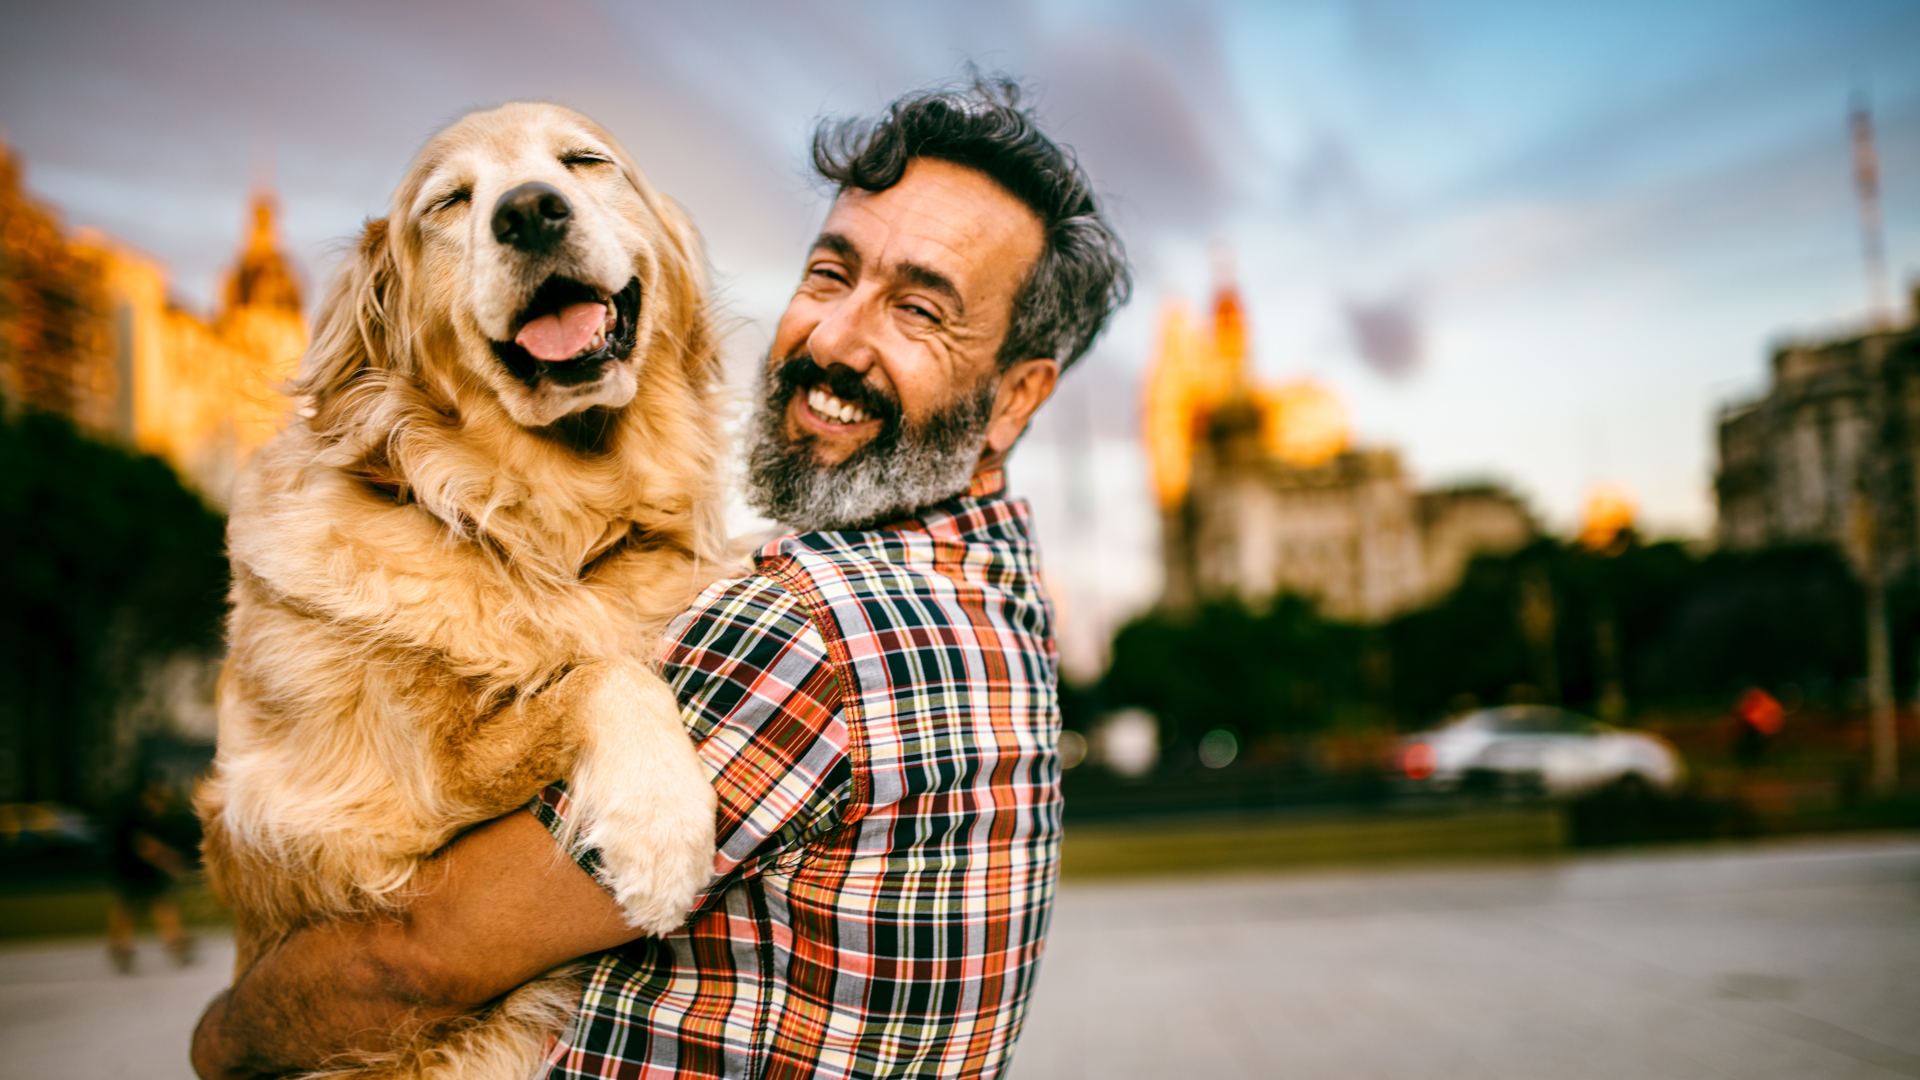 Debunking the Uncertain Science Behind Whether Having a Pet is Beneficial for Your Health